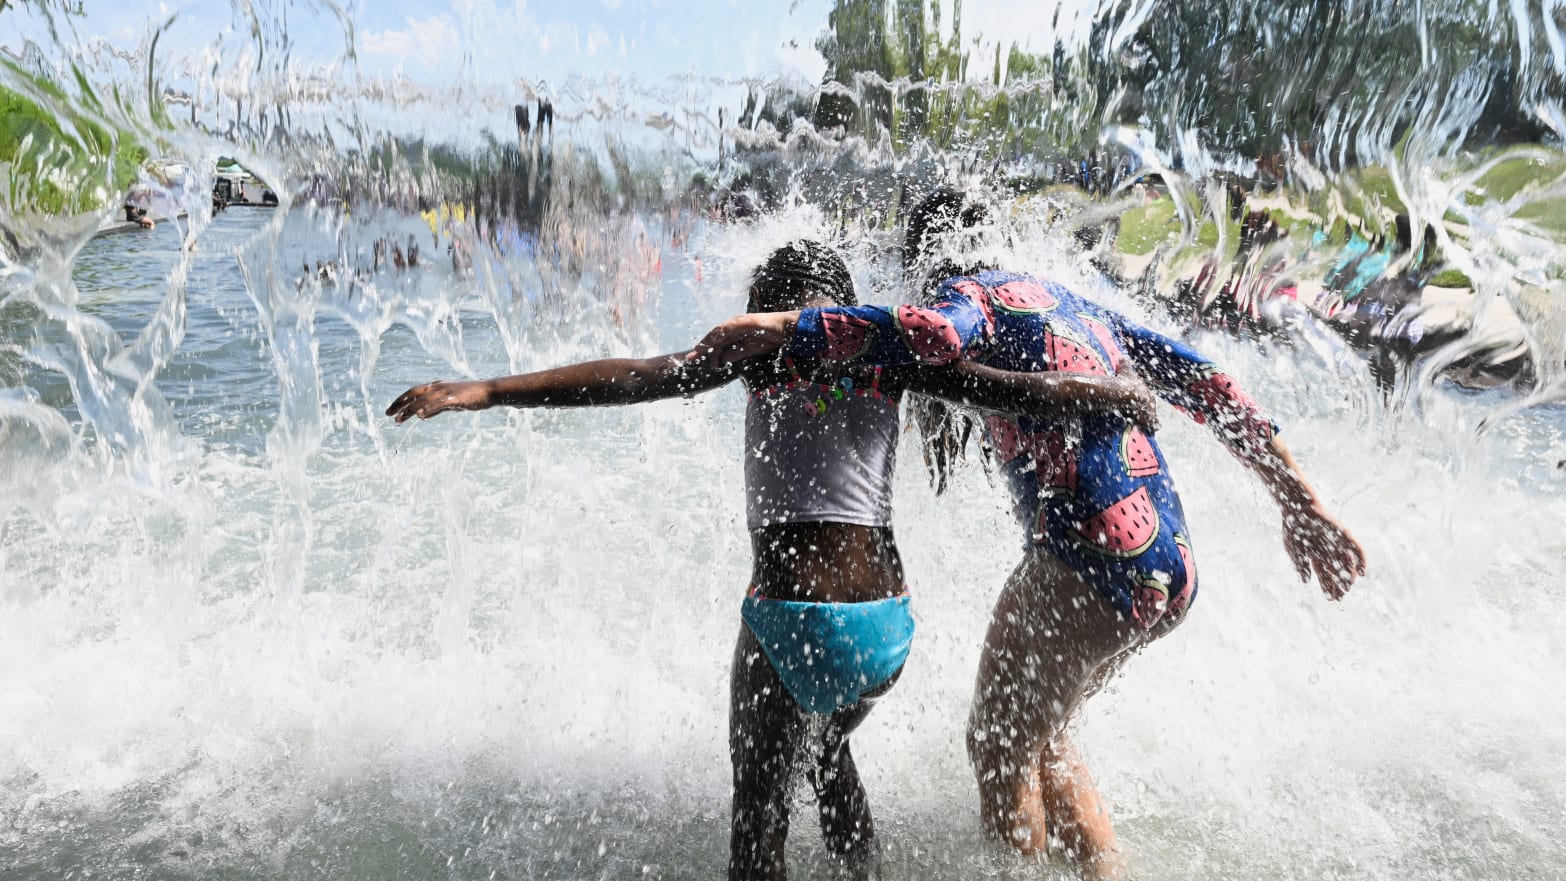 Children splash in the water to cool off from the heat wave in Washington, DC, earlier this week. 